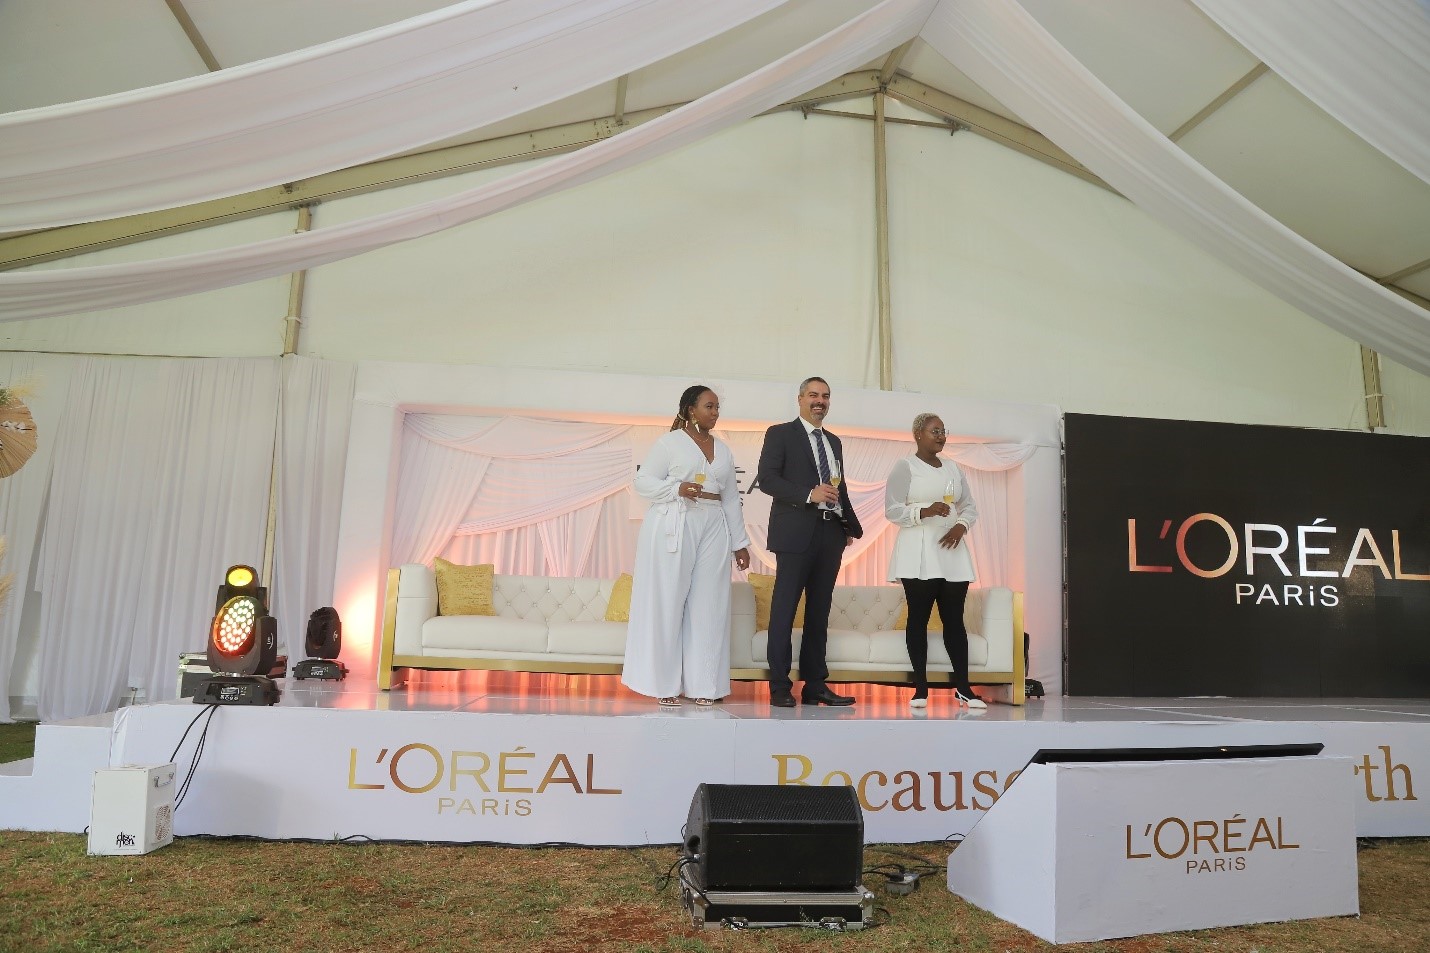 L’Oréal Paris Brand Manager Natalie Njenga, L’Oréal East Africa Managing Director Serge Sacre and Head of Marketing Victoria Karanja during the entry of L’Oréal Paris into the Kenyan market. L’Oréal Paris is expanding its footprint in the beauty market with the introduction of a wide range of luxury but affordable products specifically catered towards the Kenyan market